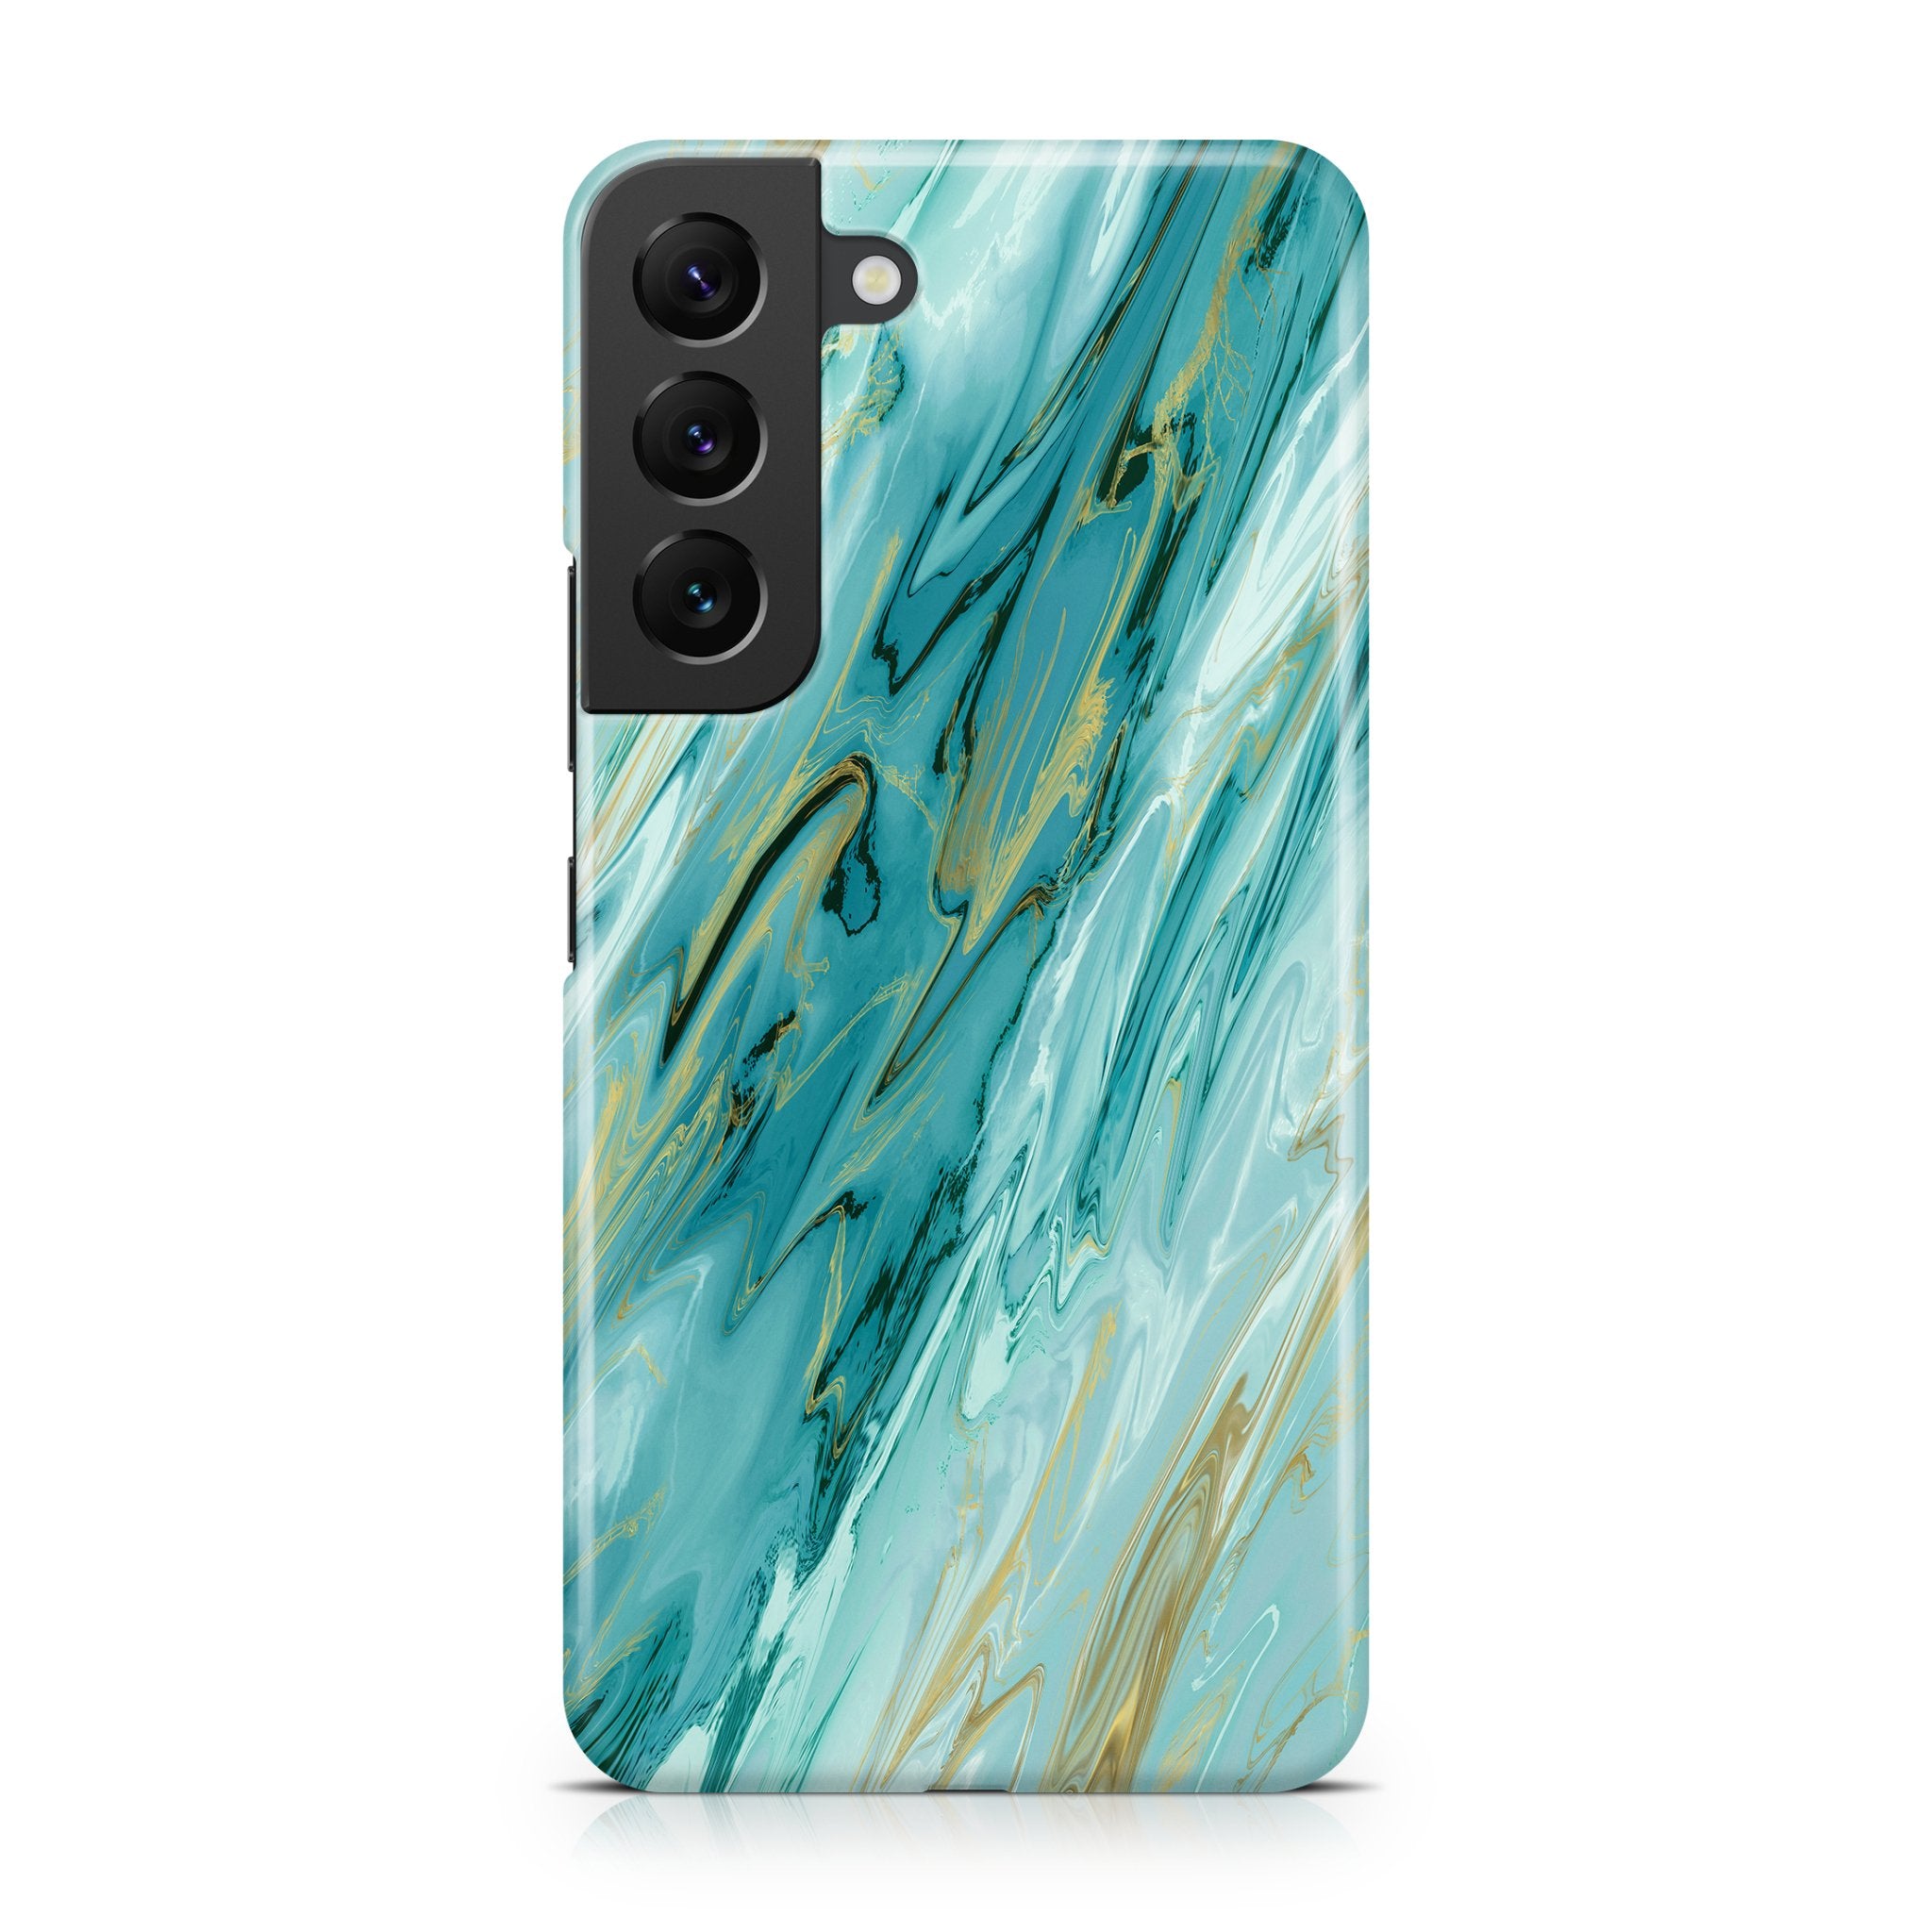 Turquoise & Gold Agate - Samsung phone case designs by CaseSwagger